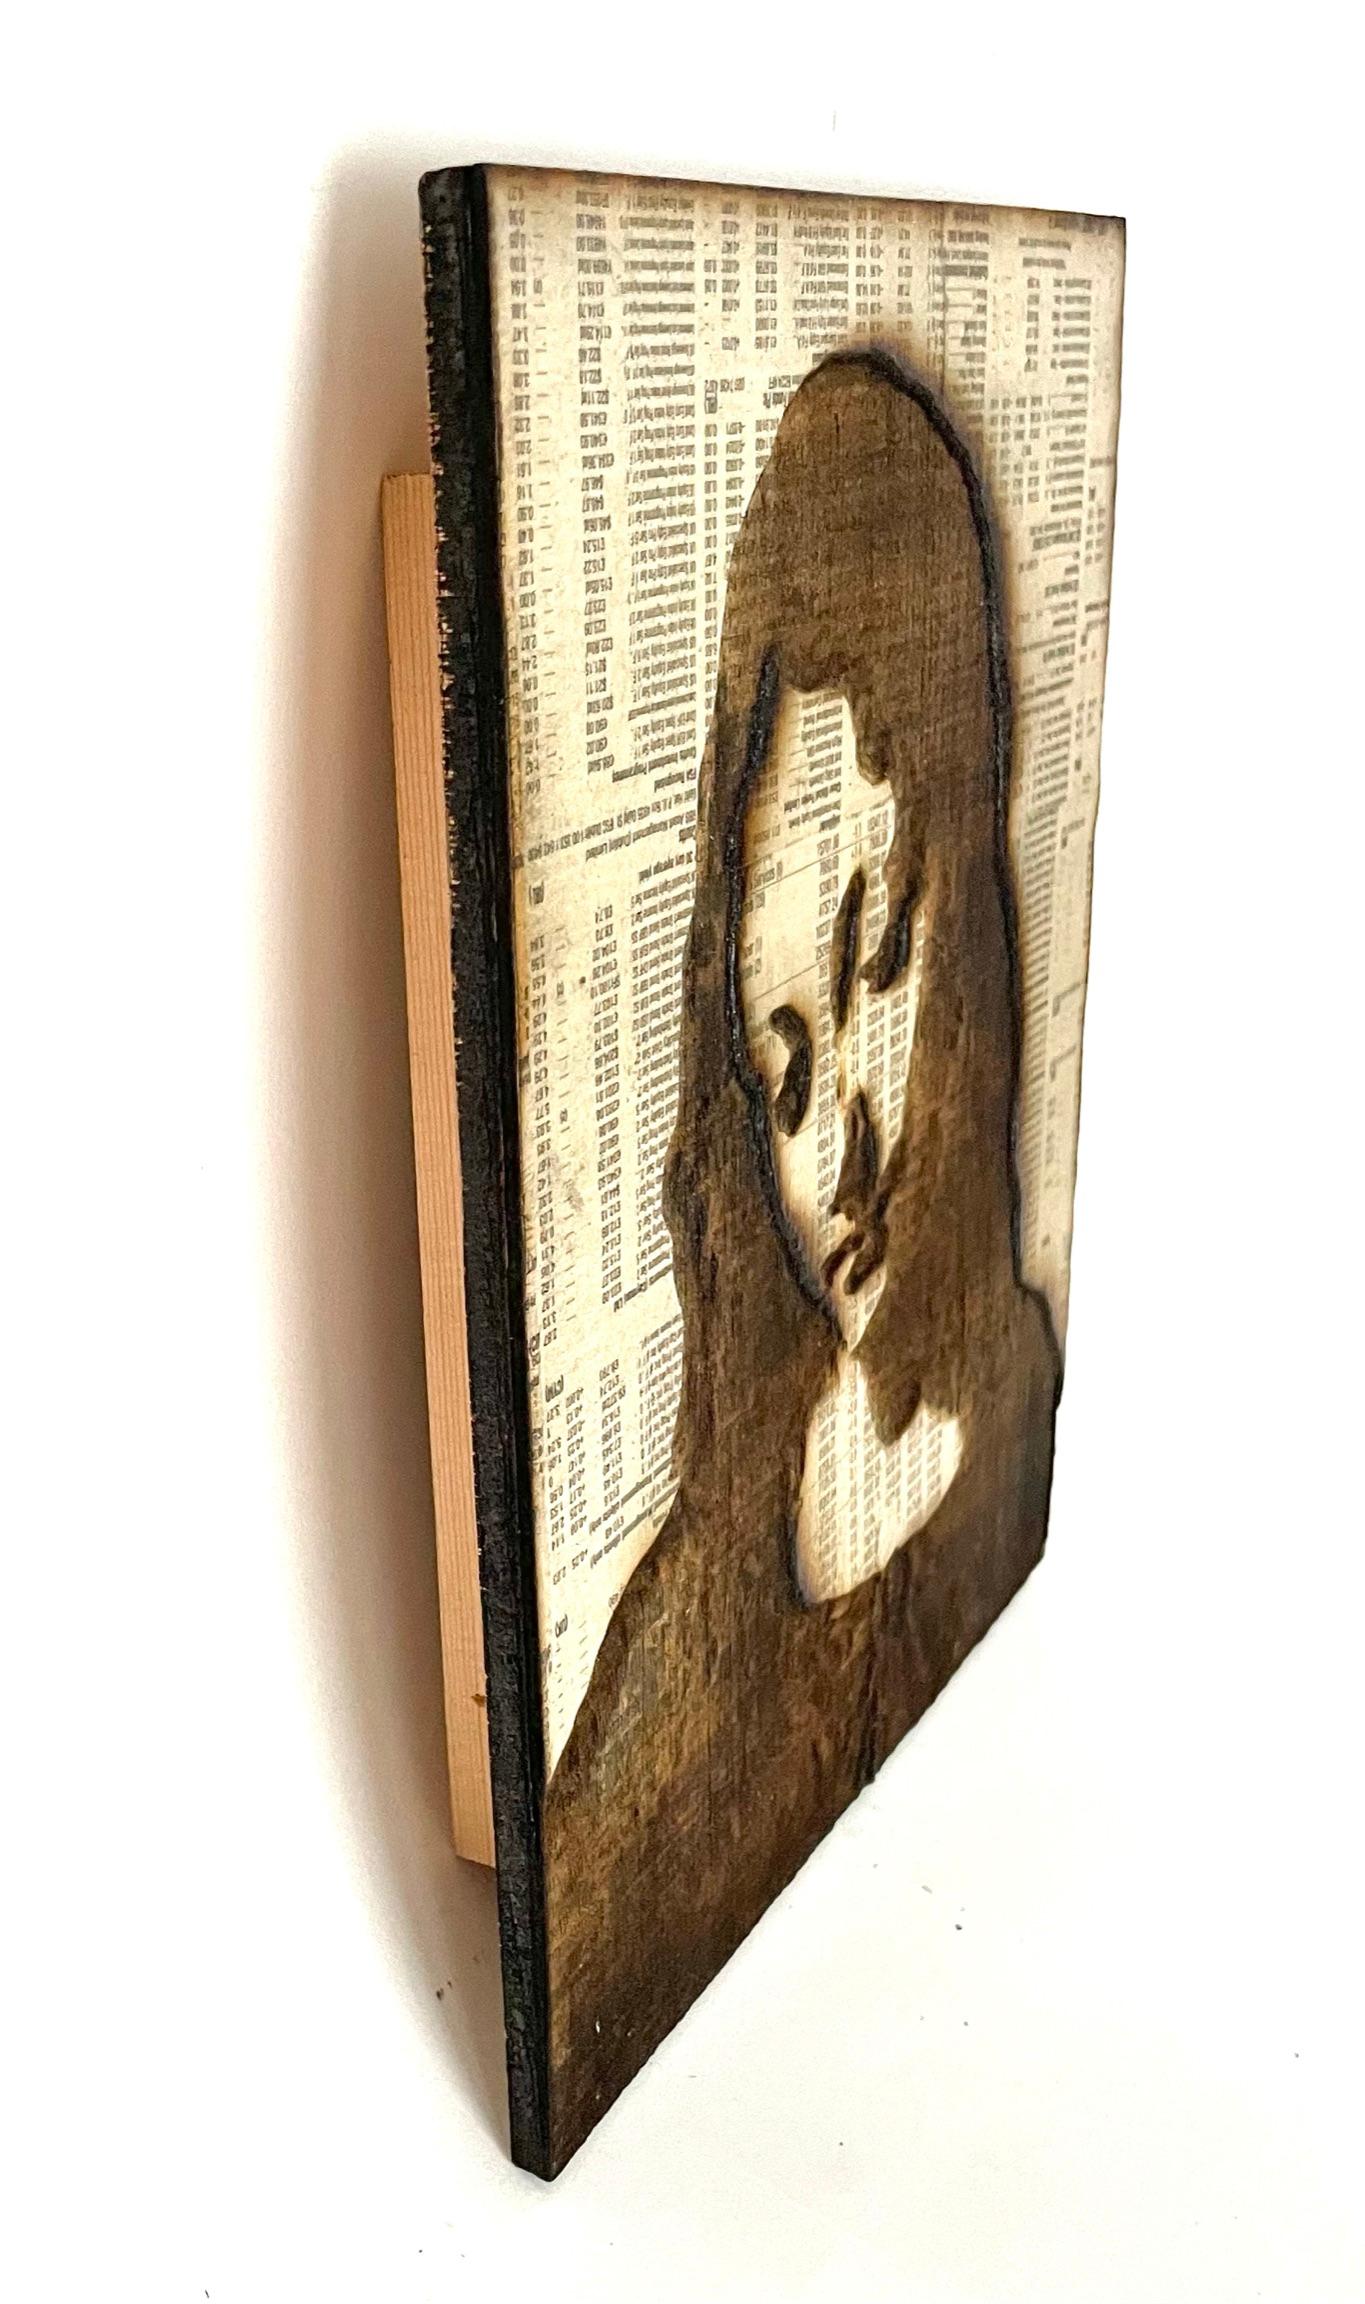 Artwork by Gordon Cheung, Mother, 2009, Laser pyrography, vaporised stock listings on plywood, 21 x 17 x 2cm

The laser pyrographic etchings are layered with financial newspaper before the image is scorched into the surfaces to create a smoky and